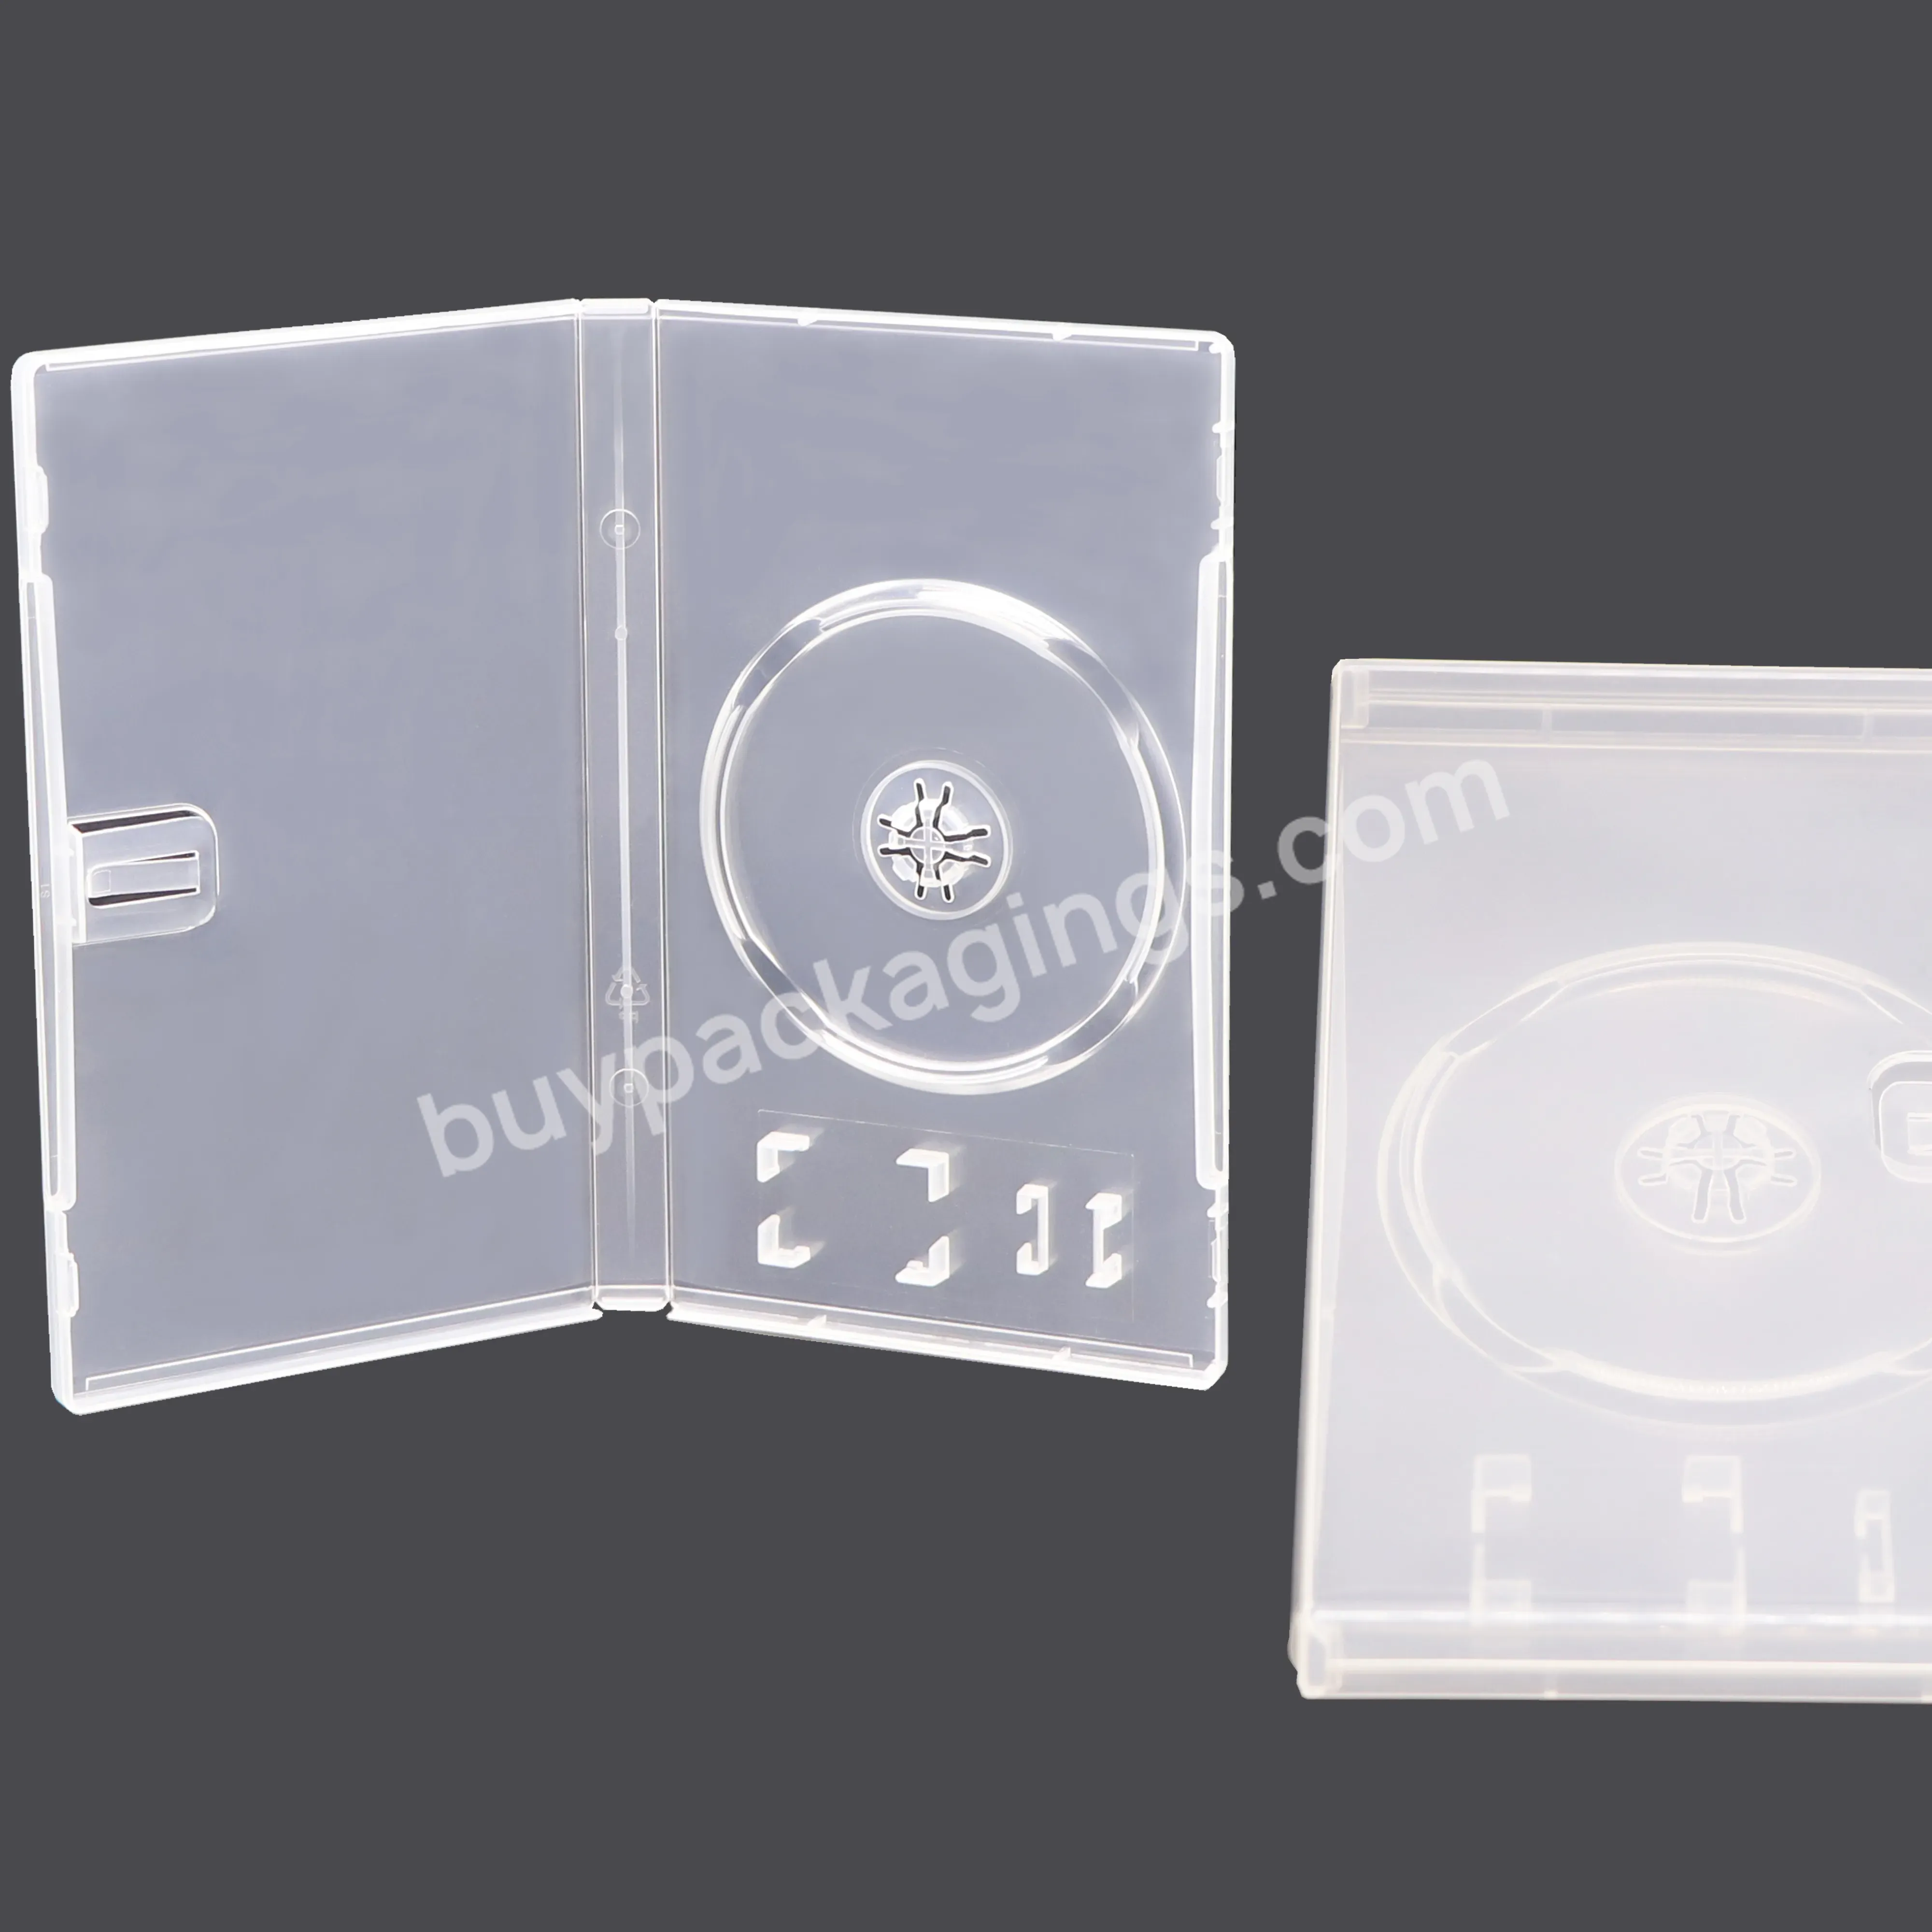 Weisheng Wholesale Factory Plastic Clear Other Game Accessories Ps2 Ps3 Ps4 Ps5 Mini Cd Case Playstation Game Cases Game Cd Case - Buy Game Cd Case,Playstation Game Cases,Ps2 Ps3 Ps4 Ps5 Mini Cd Case.